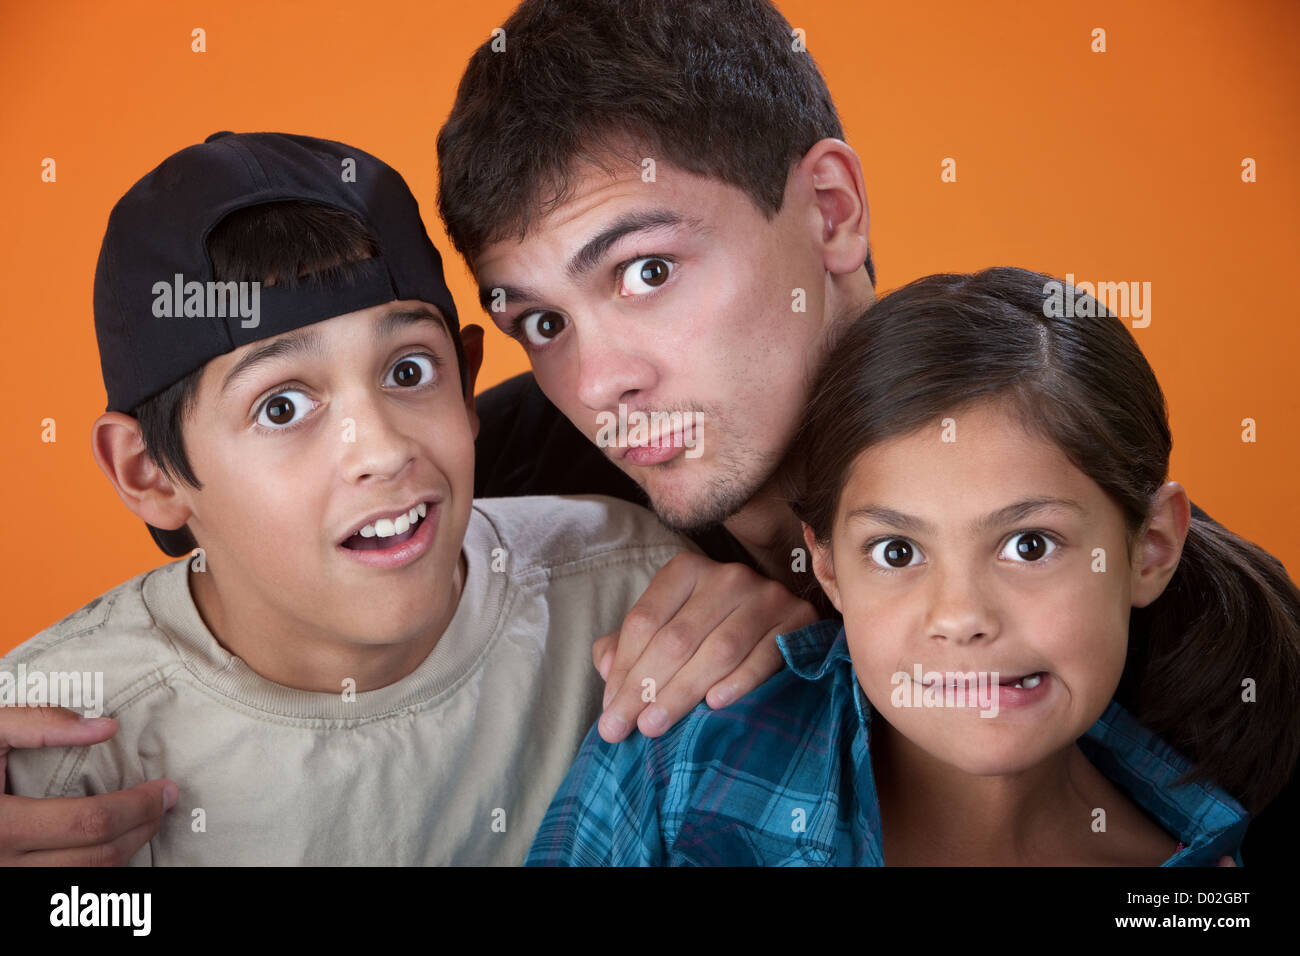 Elder brother with two younger siblings making faces Stock Photo